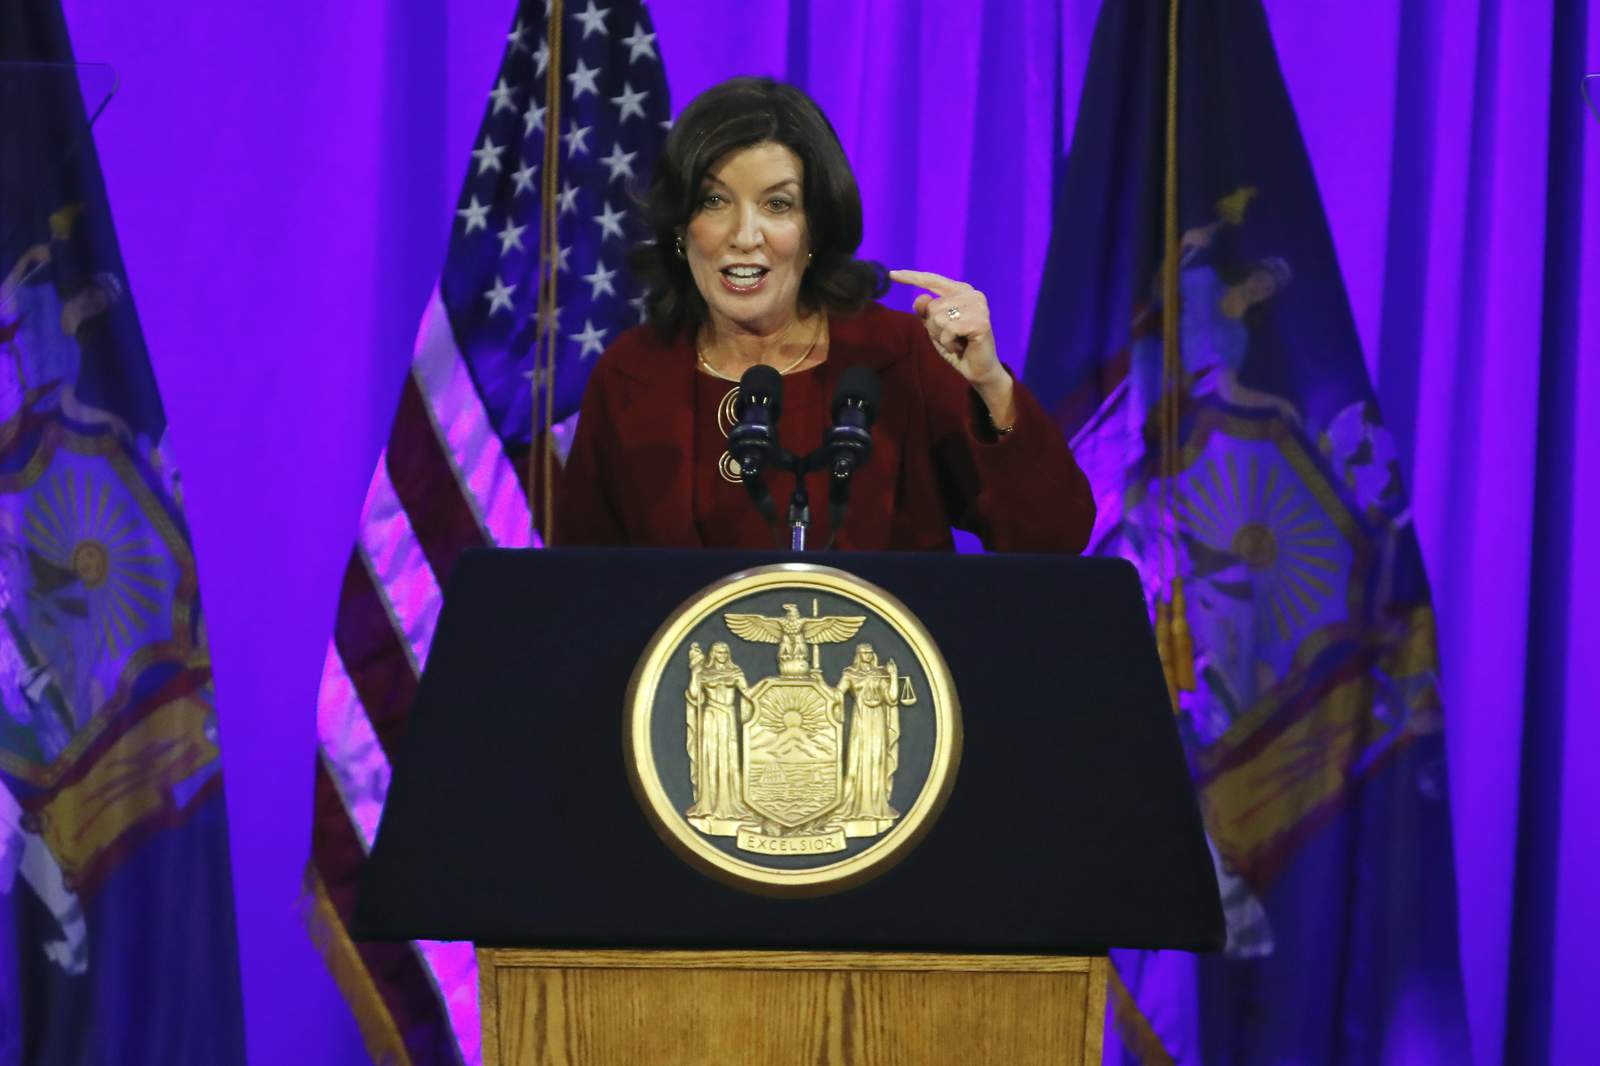 With Cuomo under fire, No. 2 Kathy Hochul treads carefully